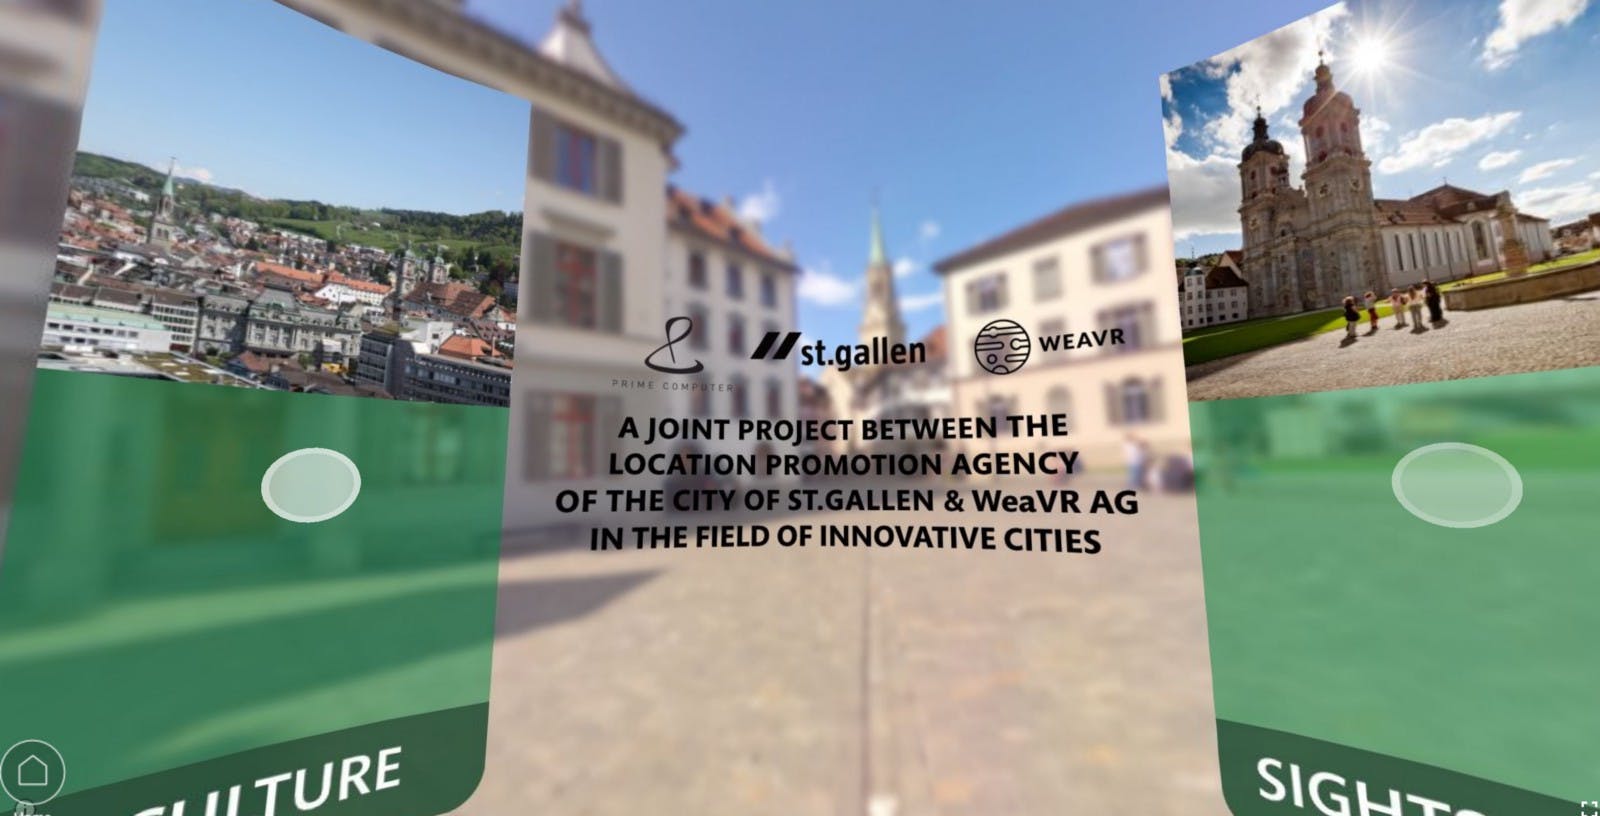 /top-5-things-we-learned-while-creating-a-virtual-reality-experience-for-the-city-of-st-gallen-563e4569086e feature image